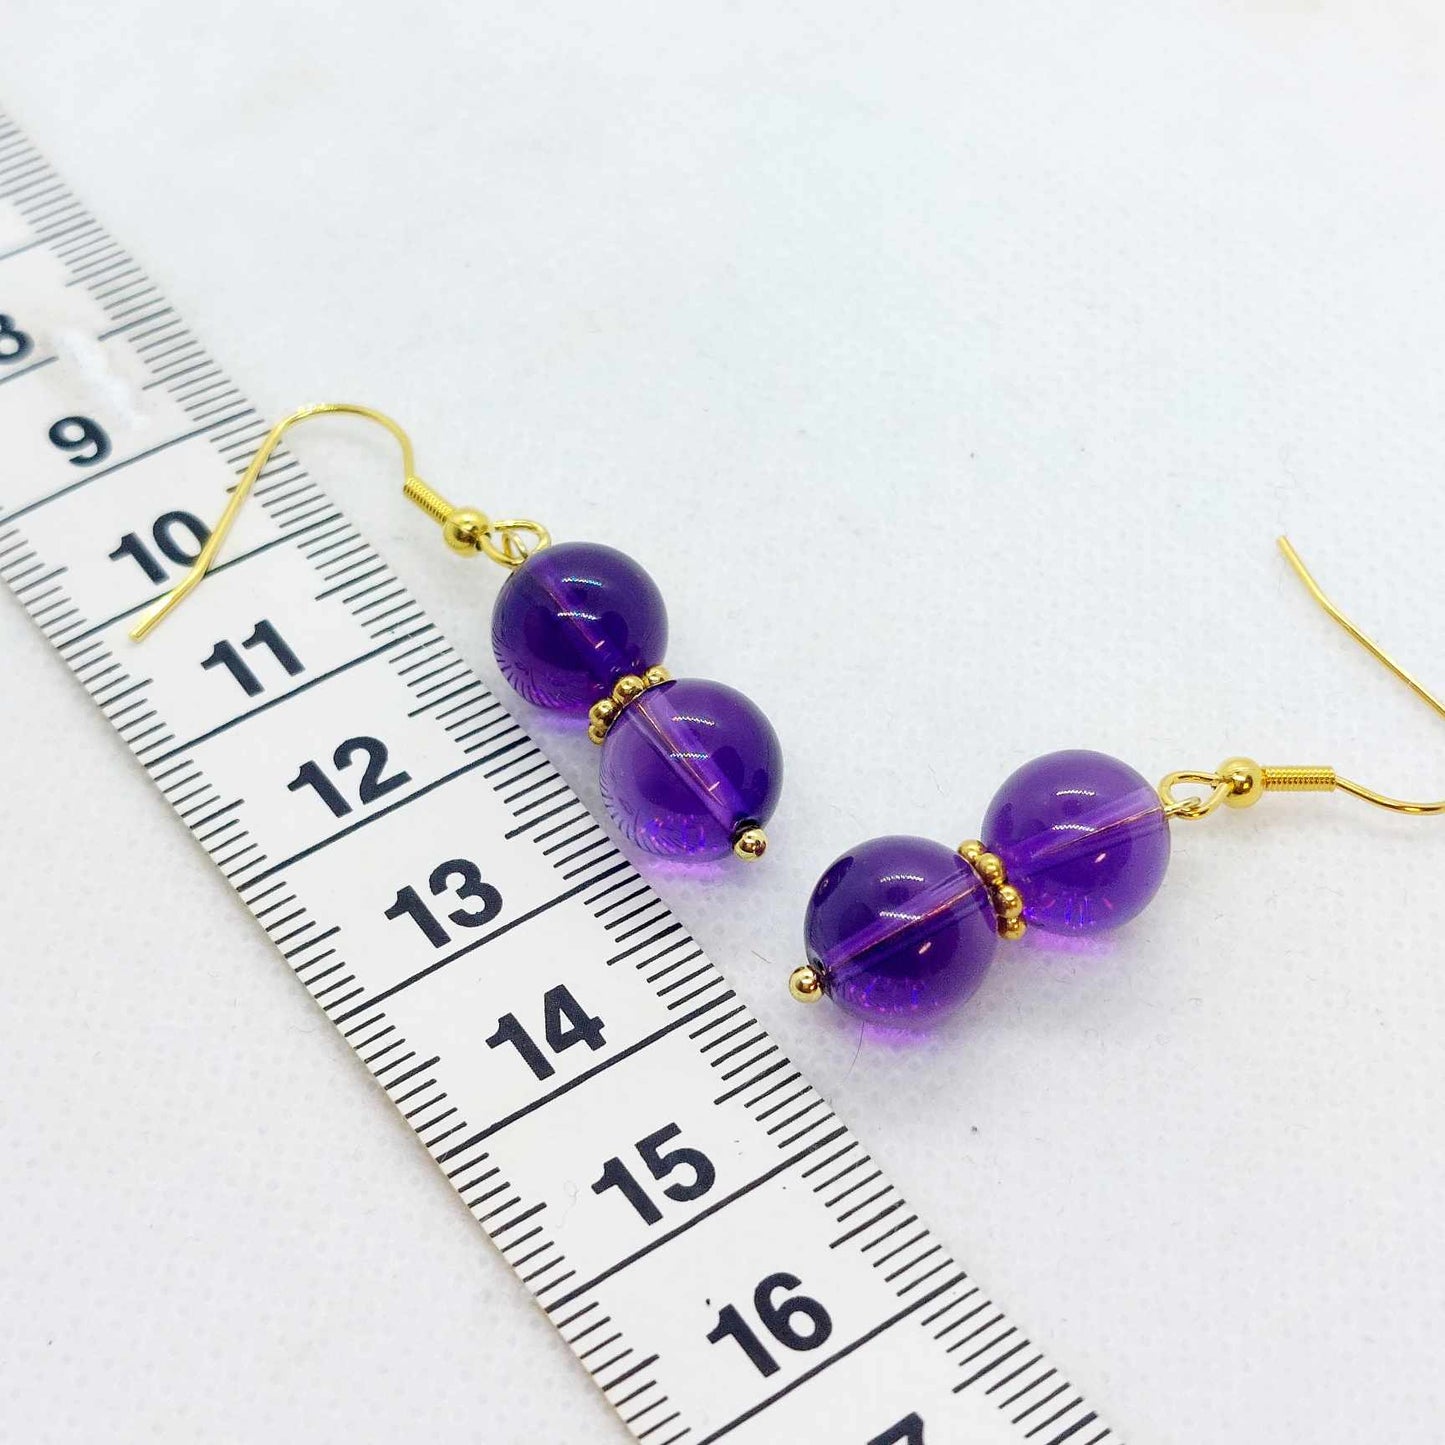 Natural Amethyst Dangle Earrings with 10mm Stones in Stainless Steel Gold Plated